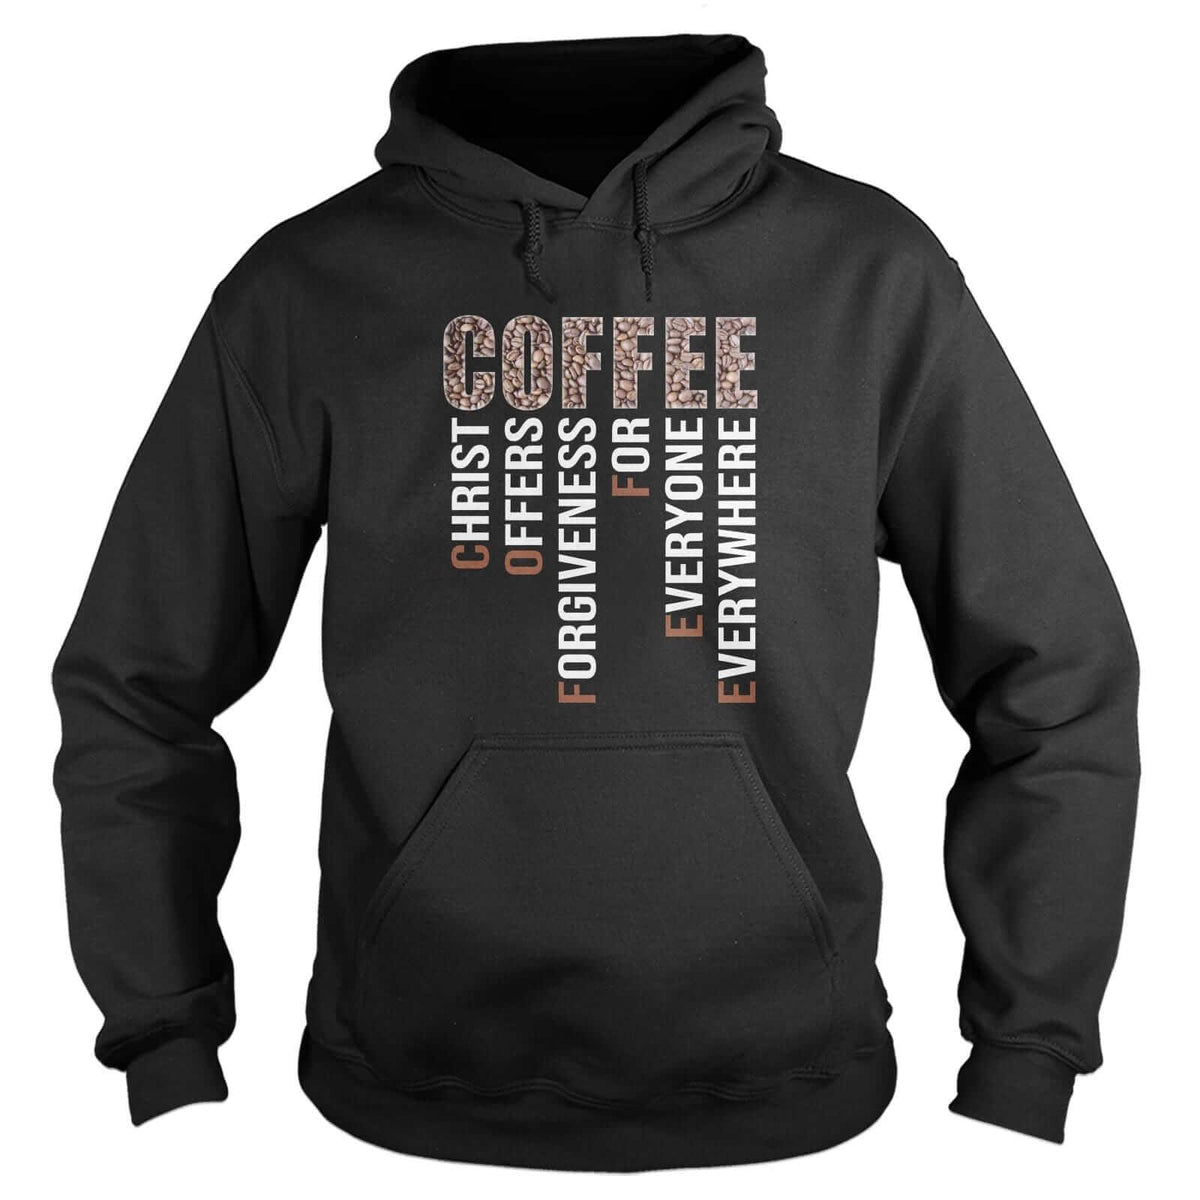 COFFEE Christ Offers Forgiveness For Everyone Everywhere Hoodie - Our True God